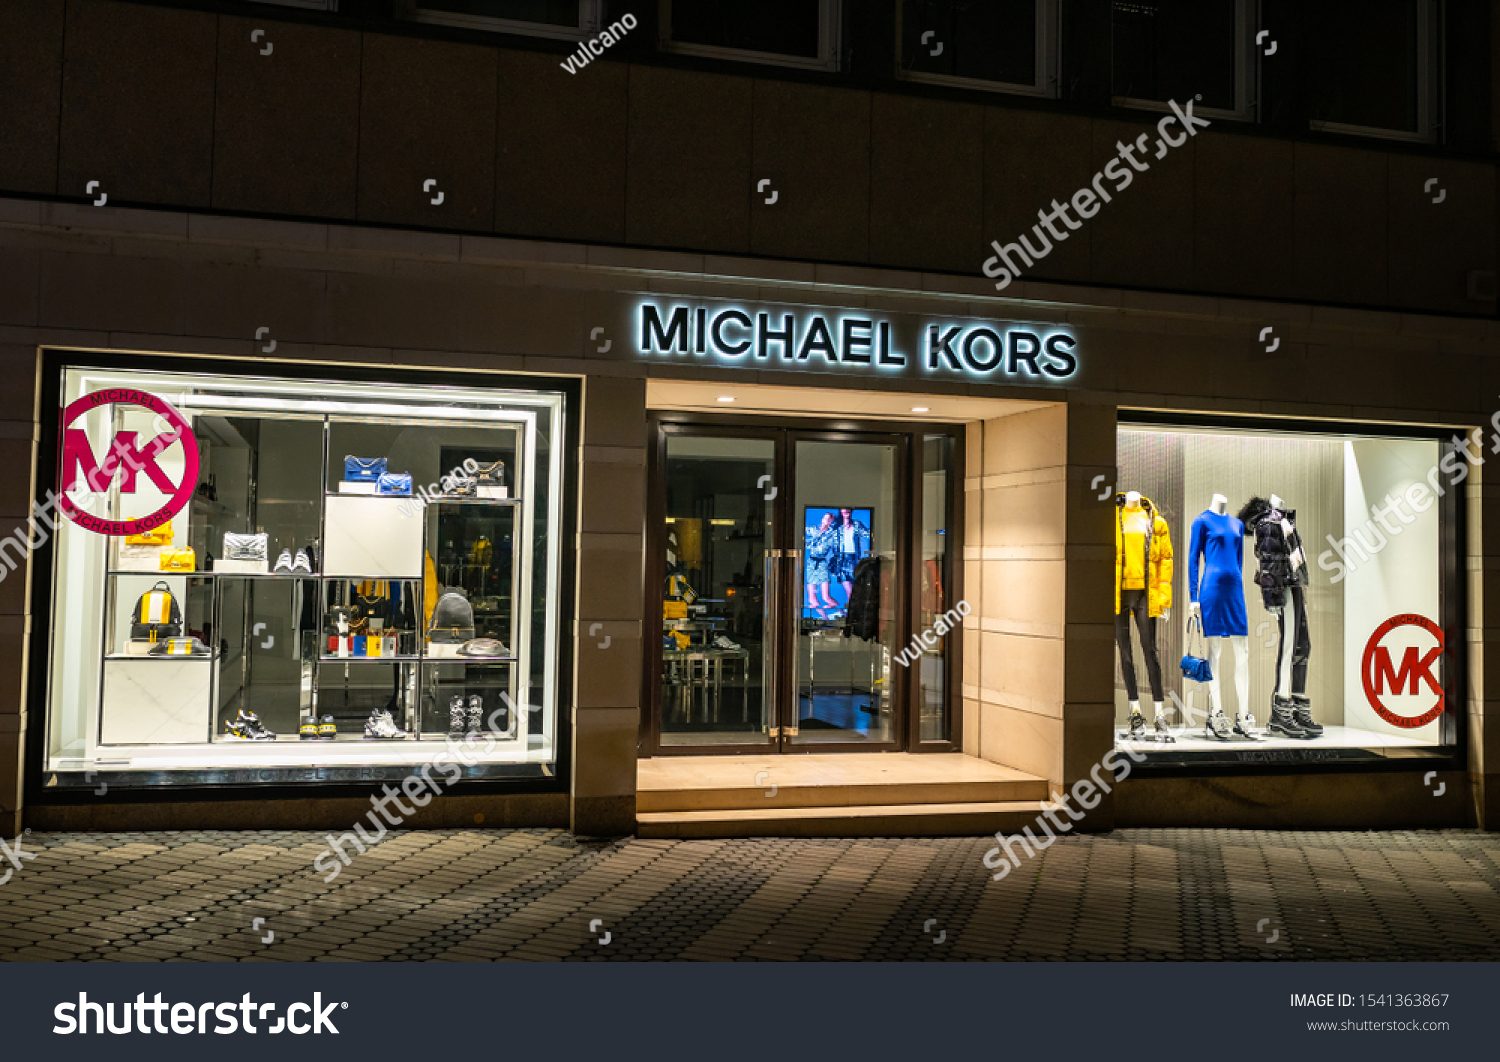 outlet michael kors germany